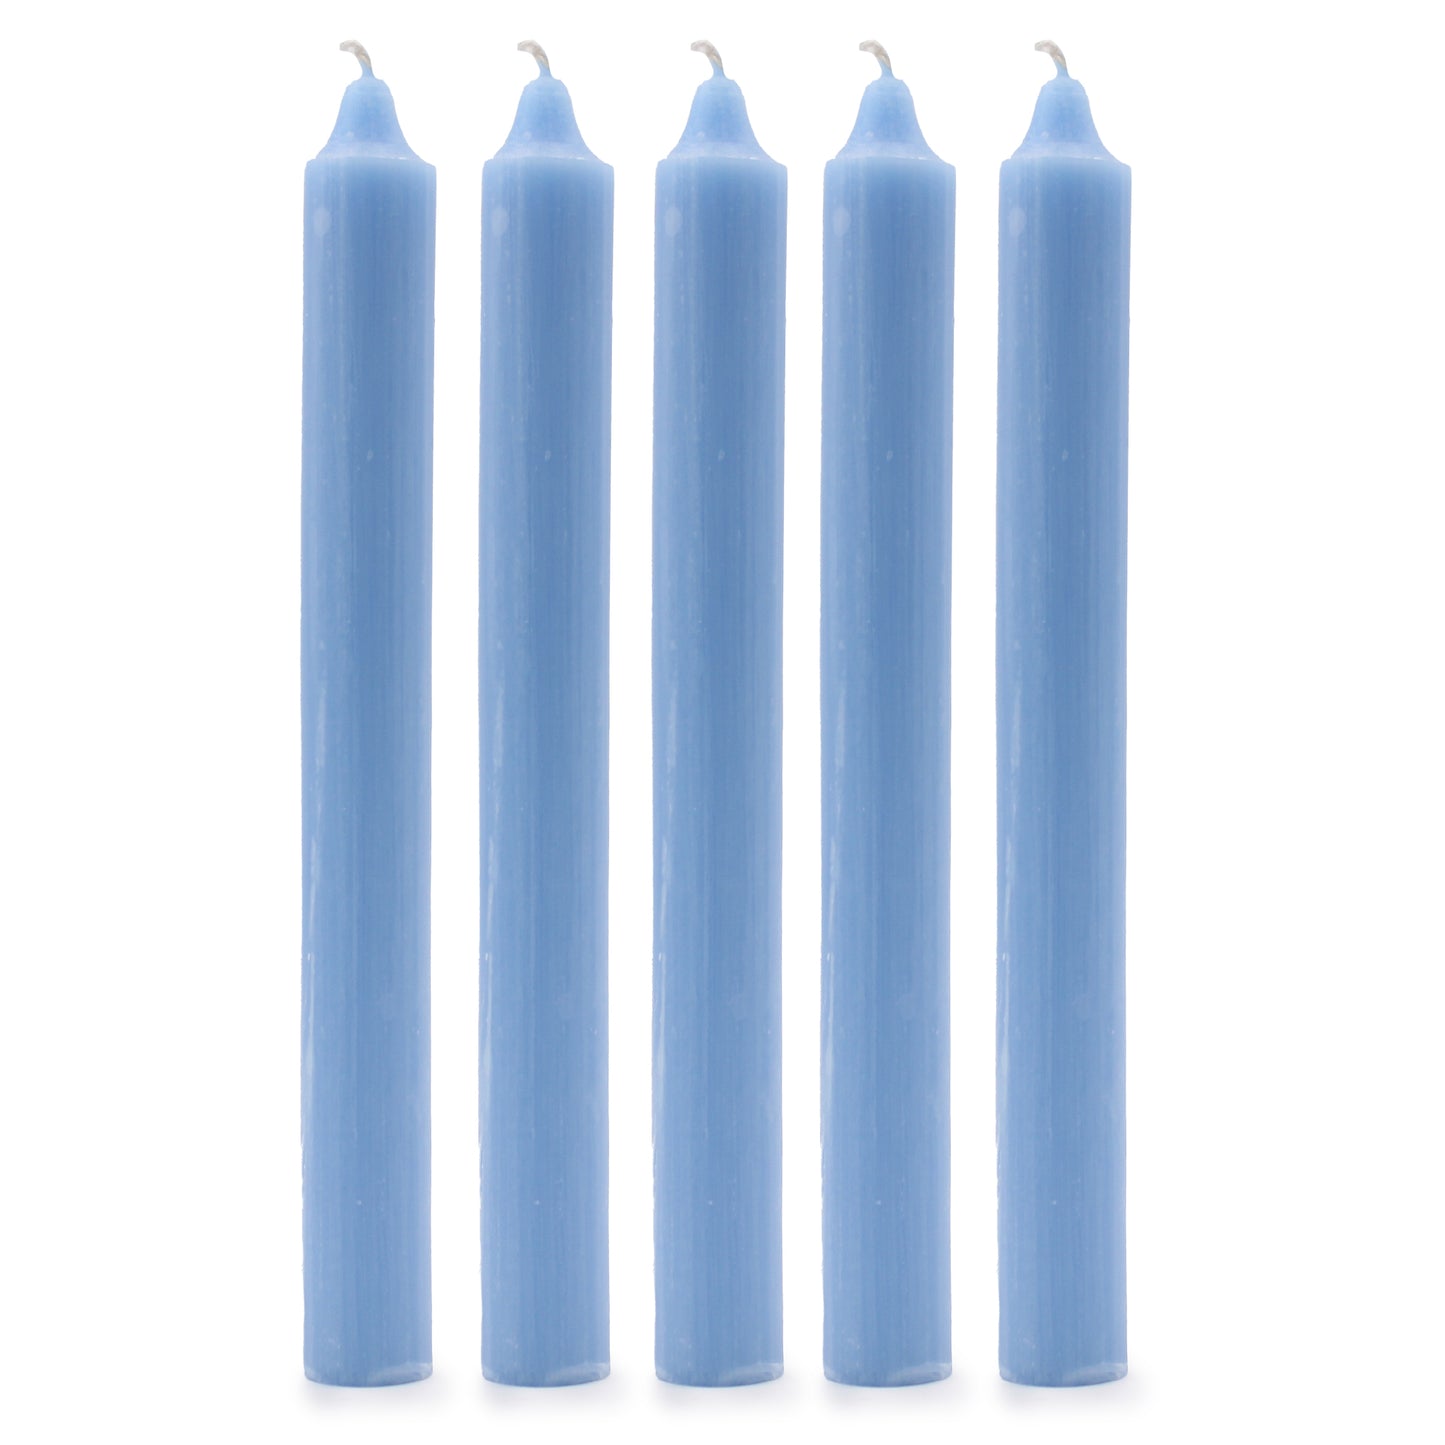 Solid Colour Dinner Candles - Rustic Sea Blue - Pack of 5